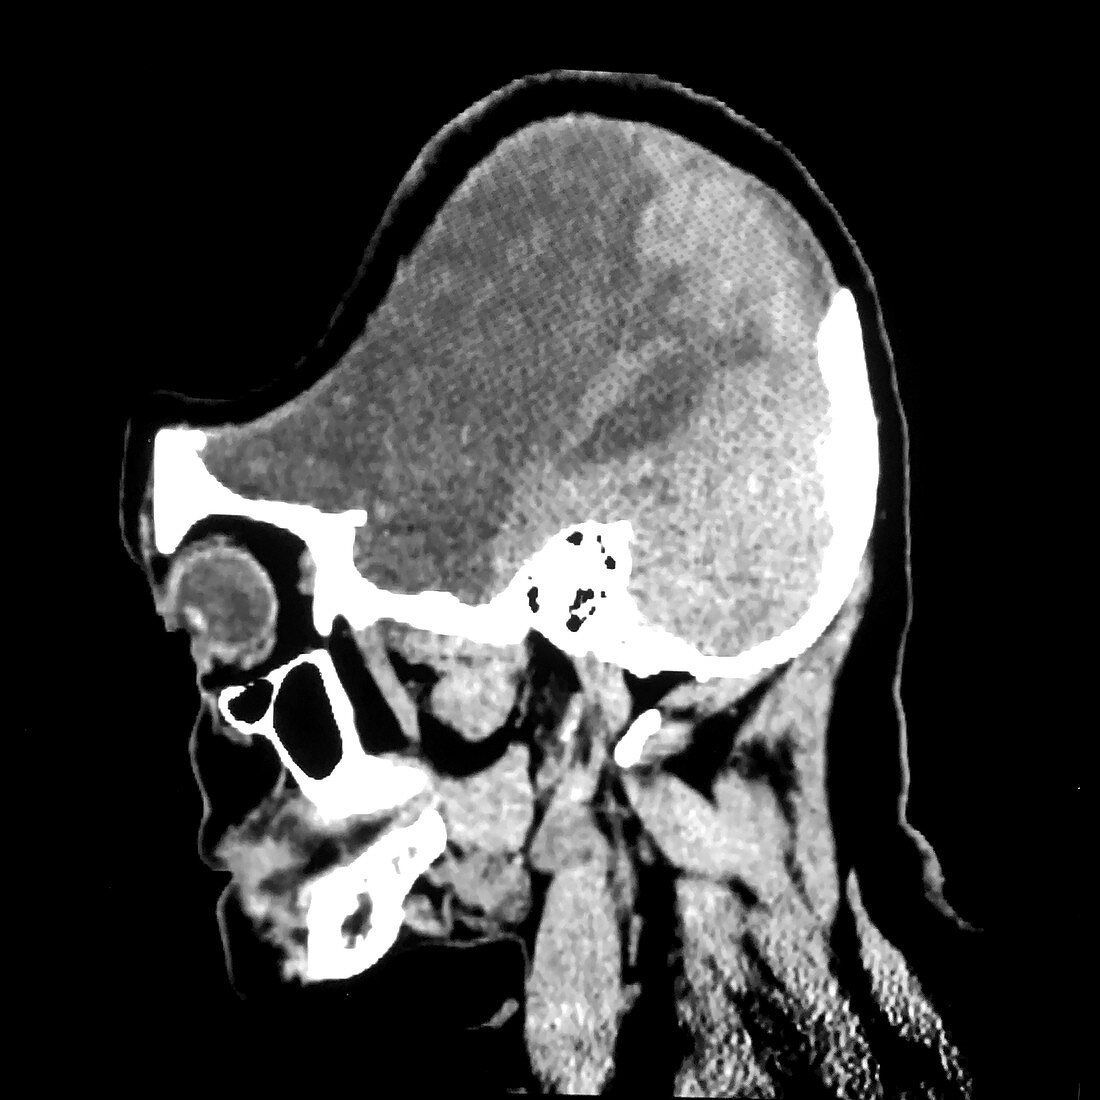 Sunken Flap Syndrome, CT